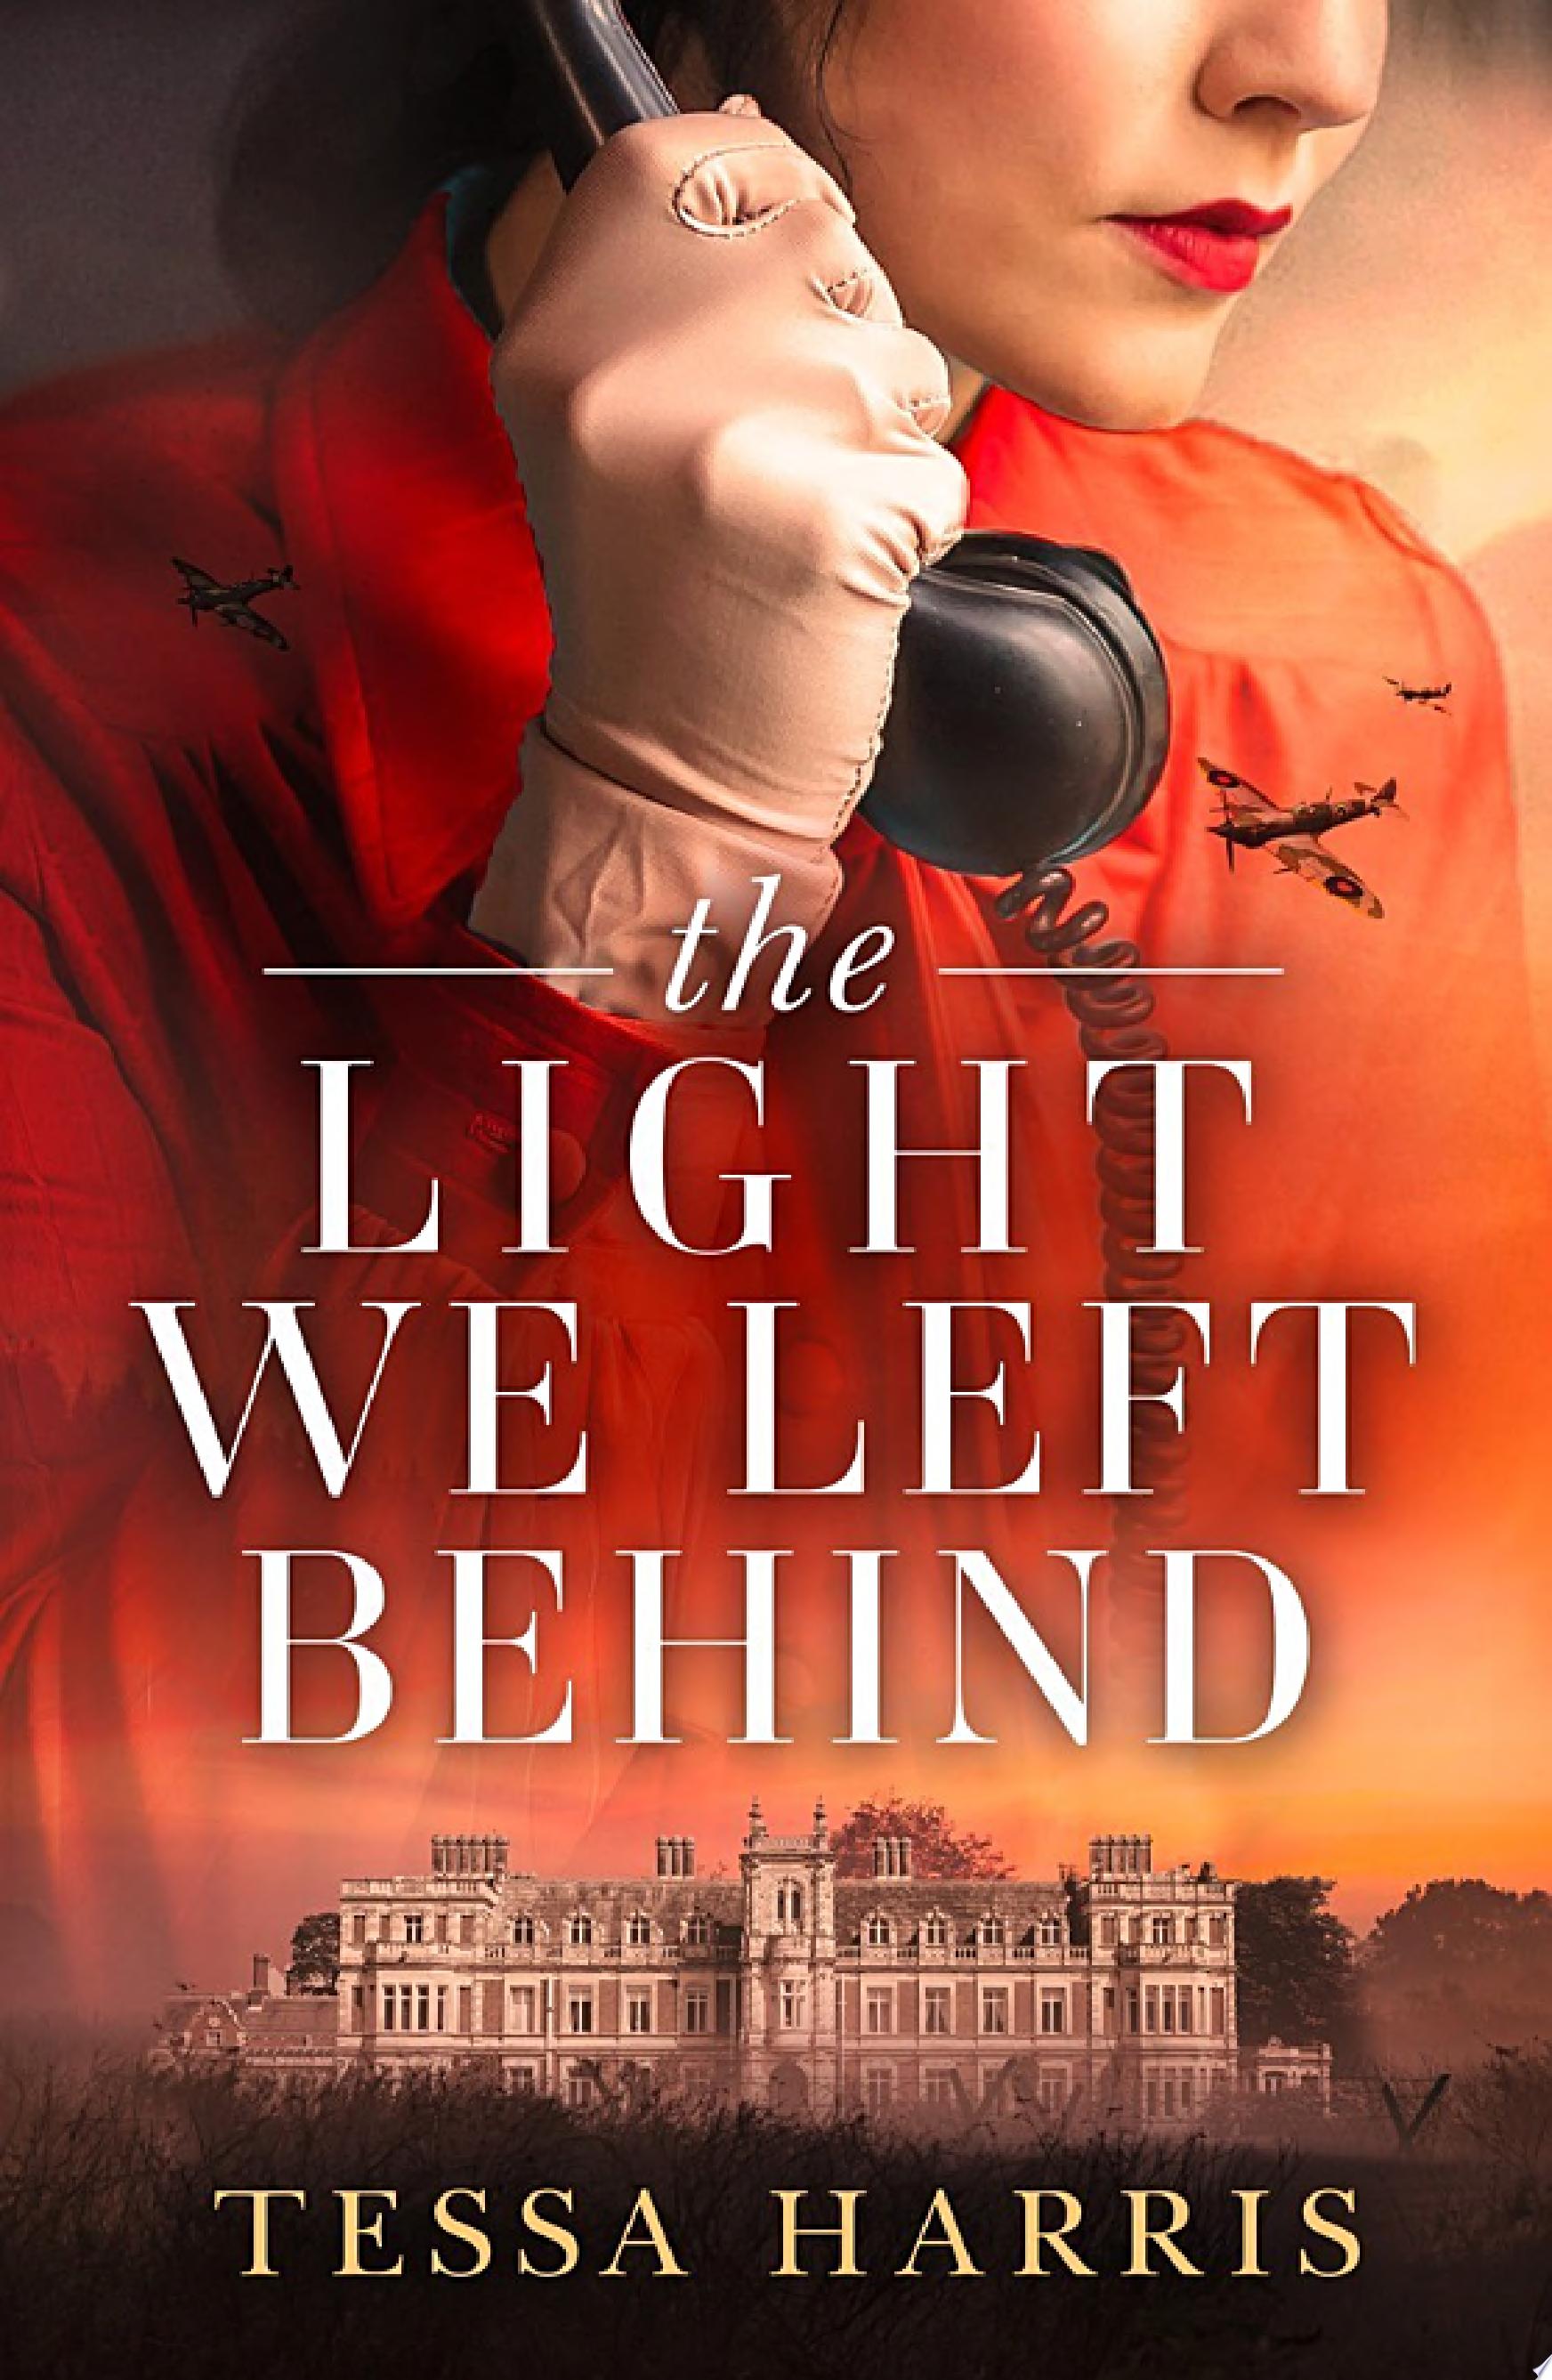 Image for "The Light We Left Behind"